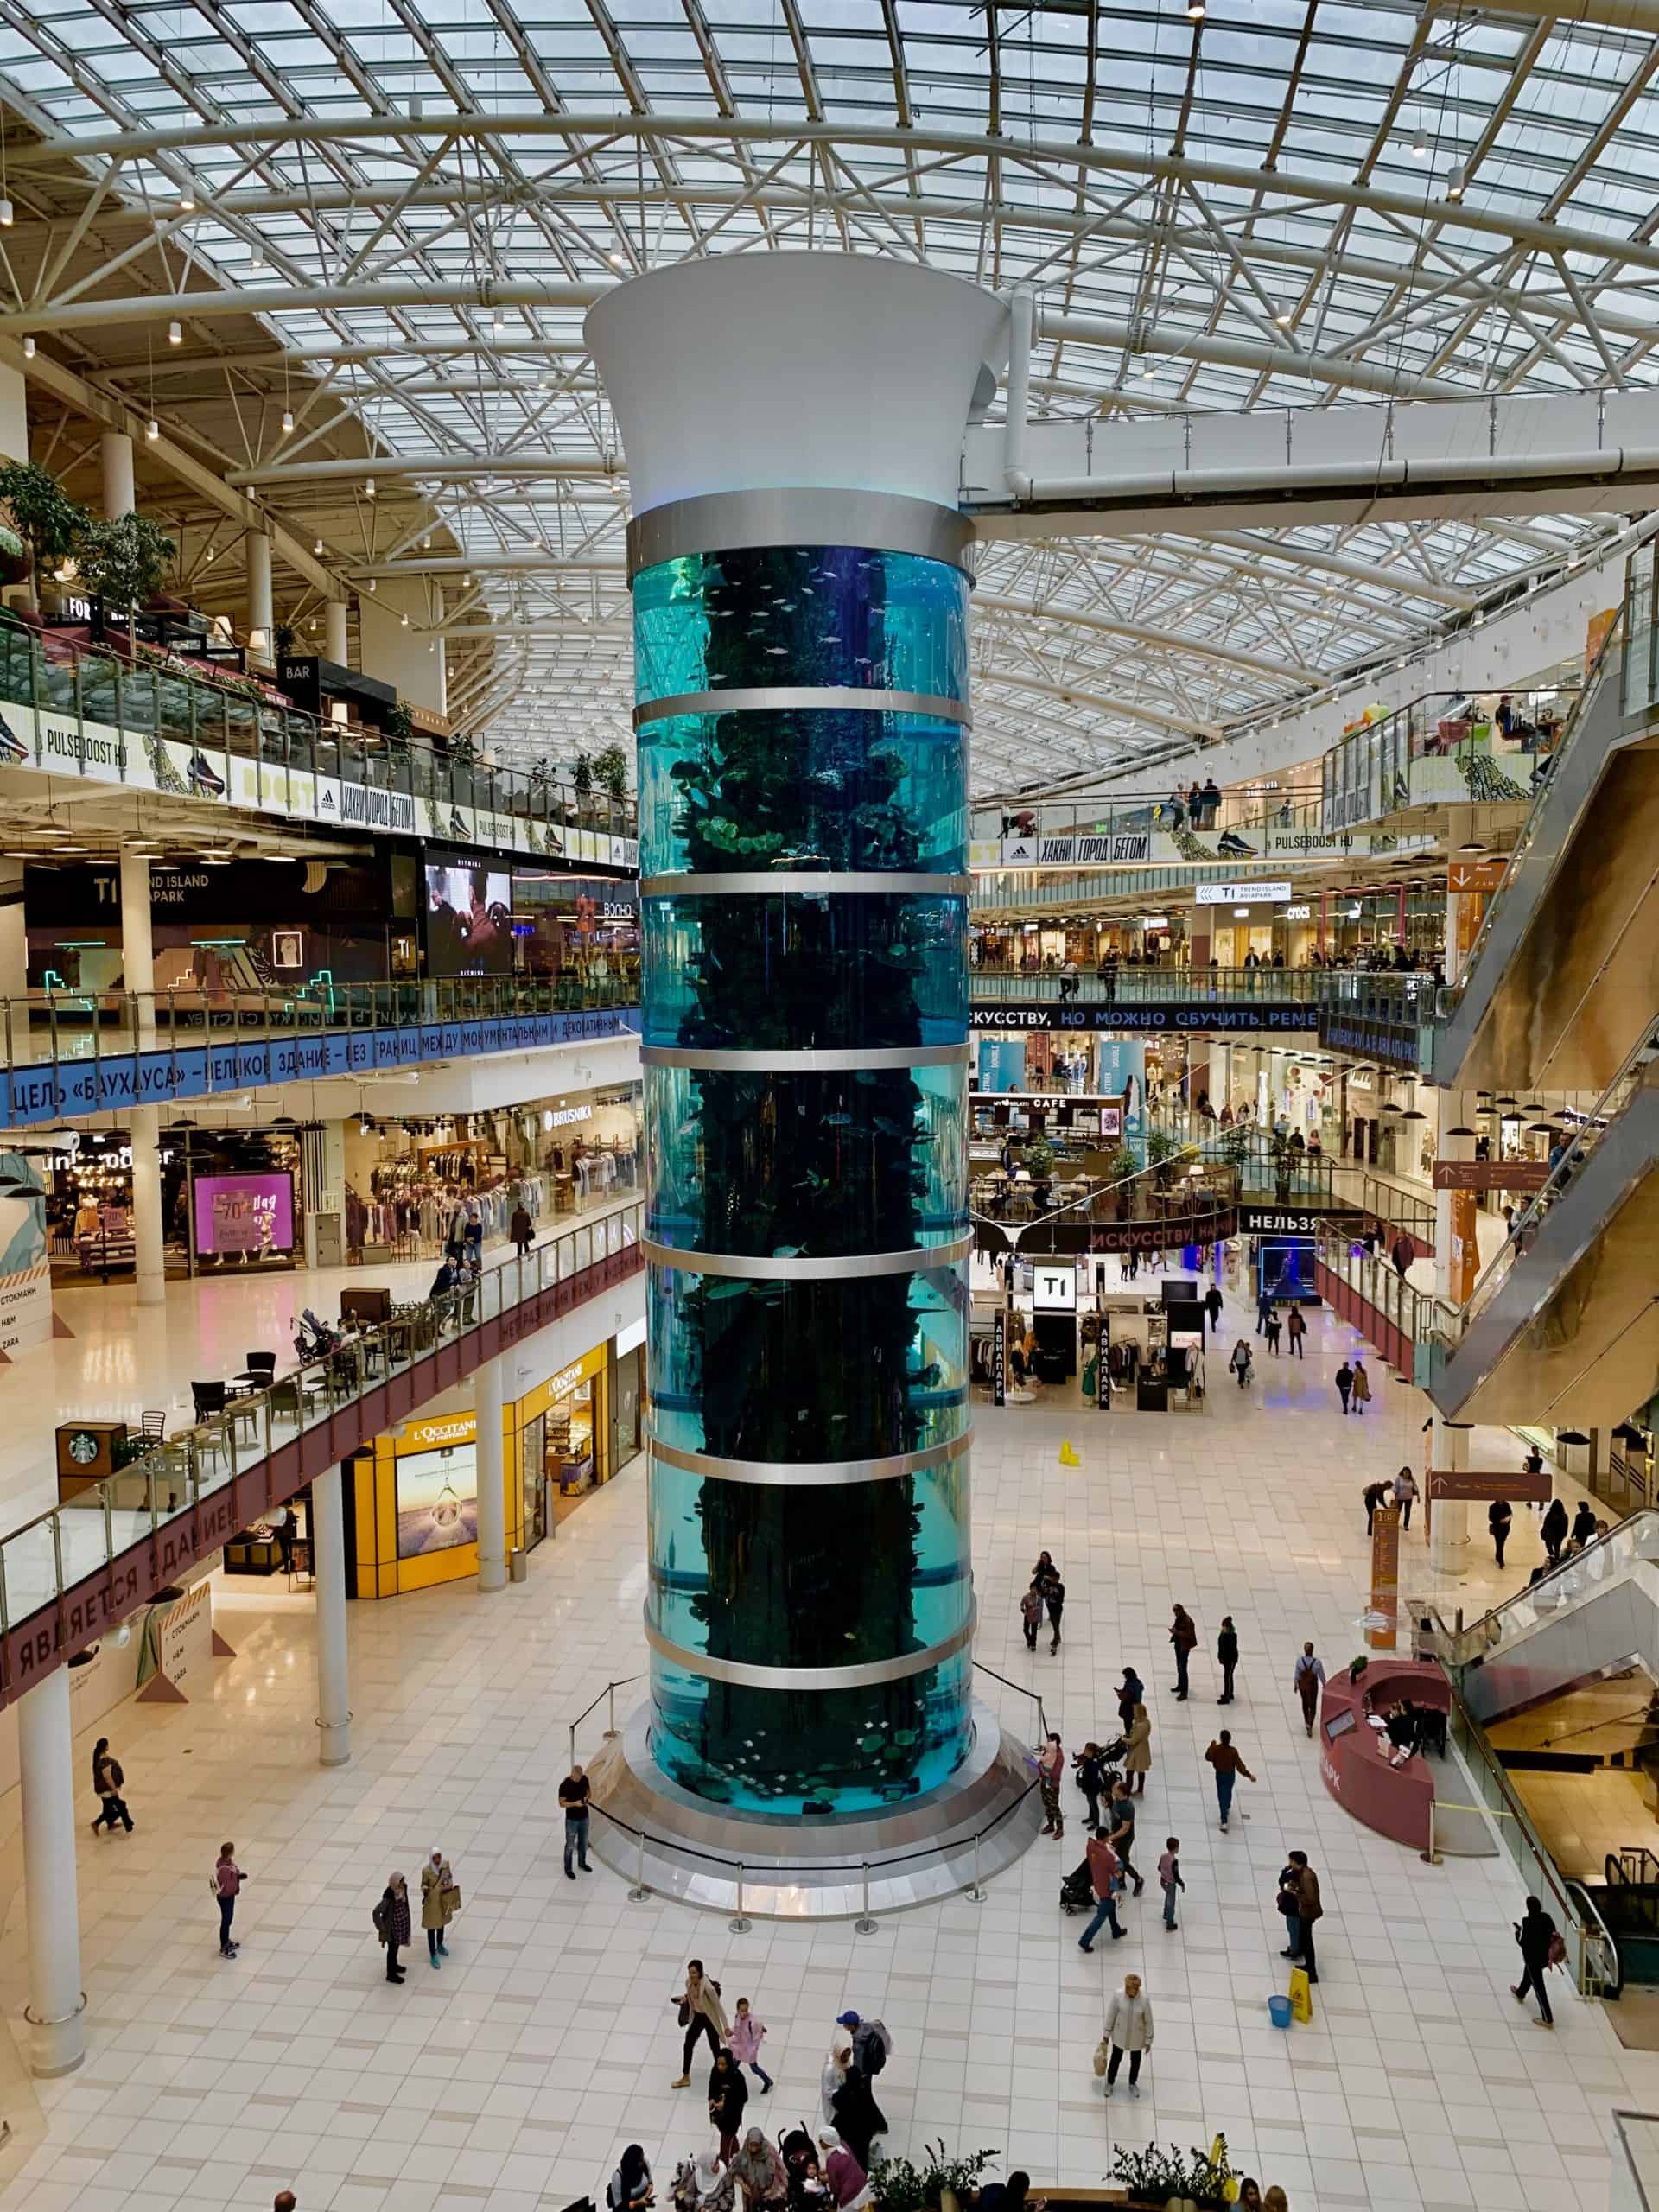 largest cylindrical aquarium in the world in aviapark mall moscow